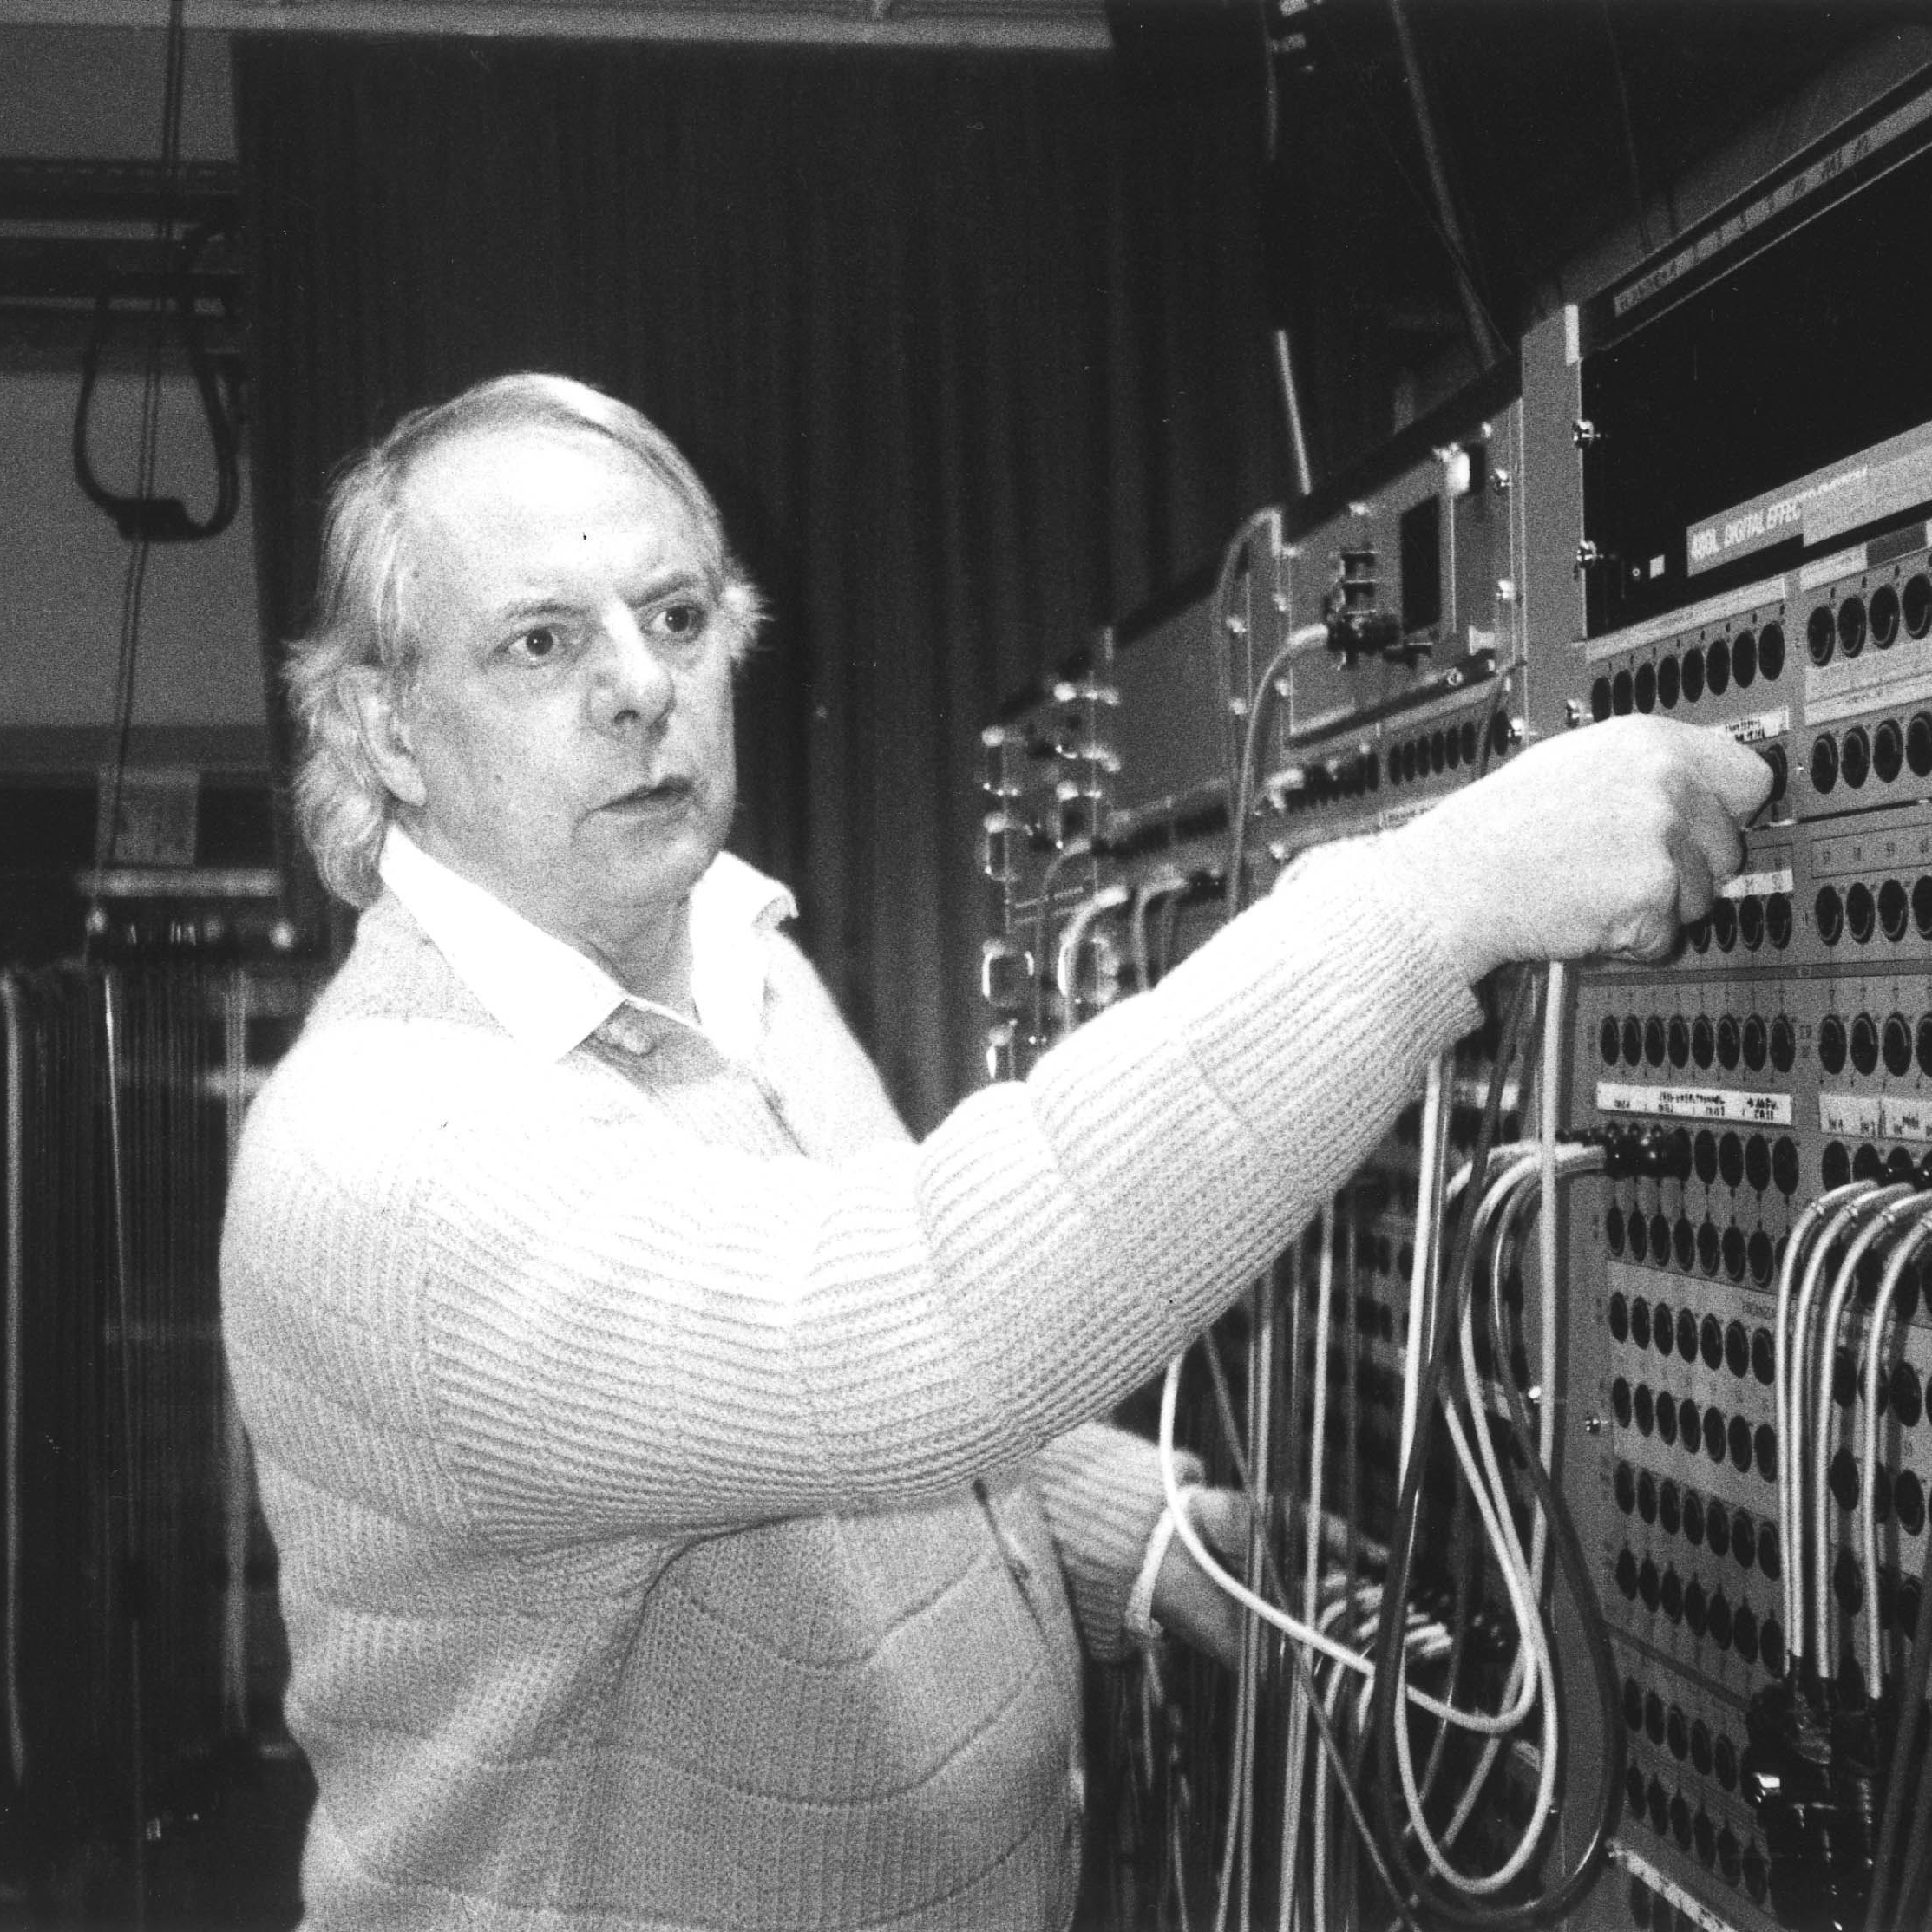 Karlheinz Stockhausen in the Electronic Music Studio of the WDR, 1994